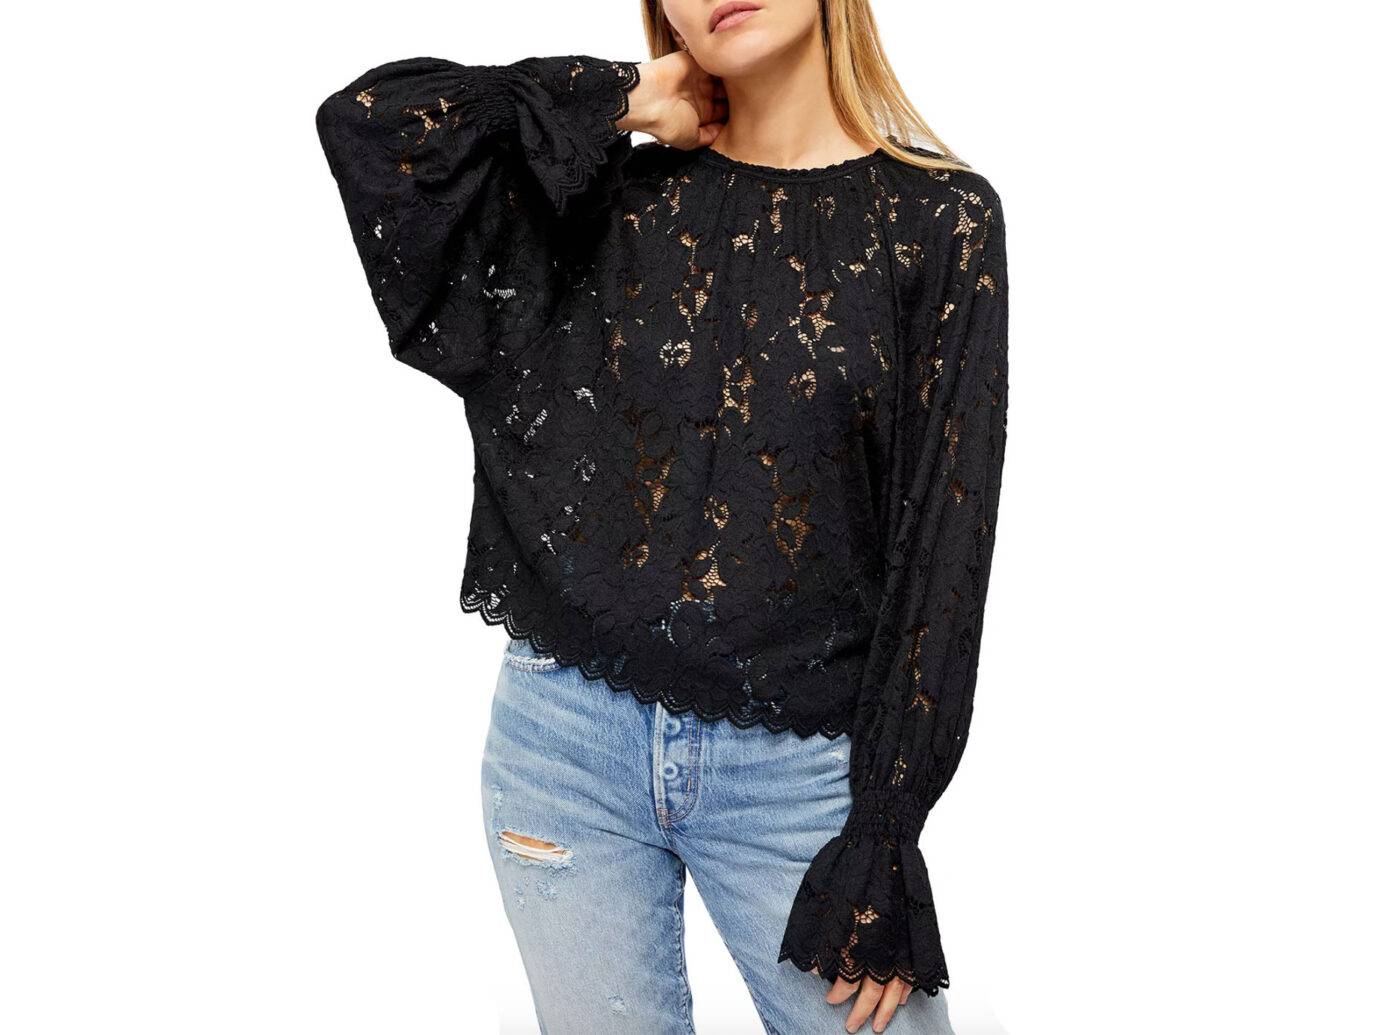 Free-People-Olivia-Lace-Top